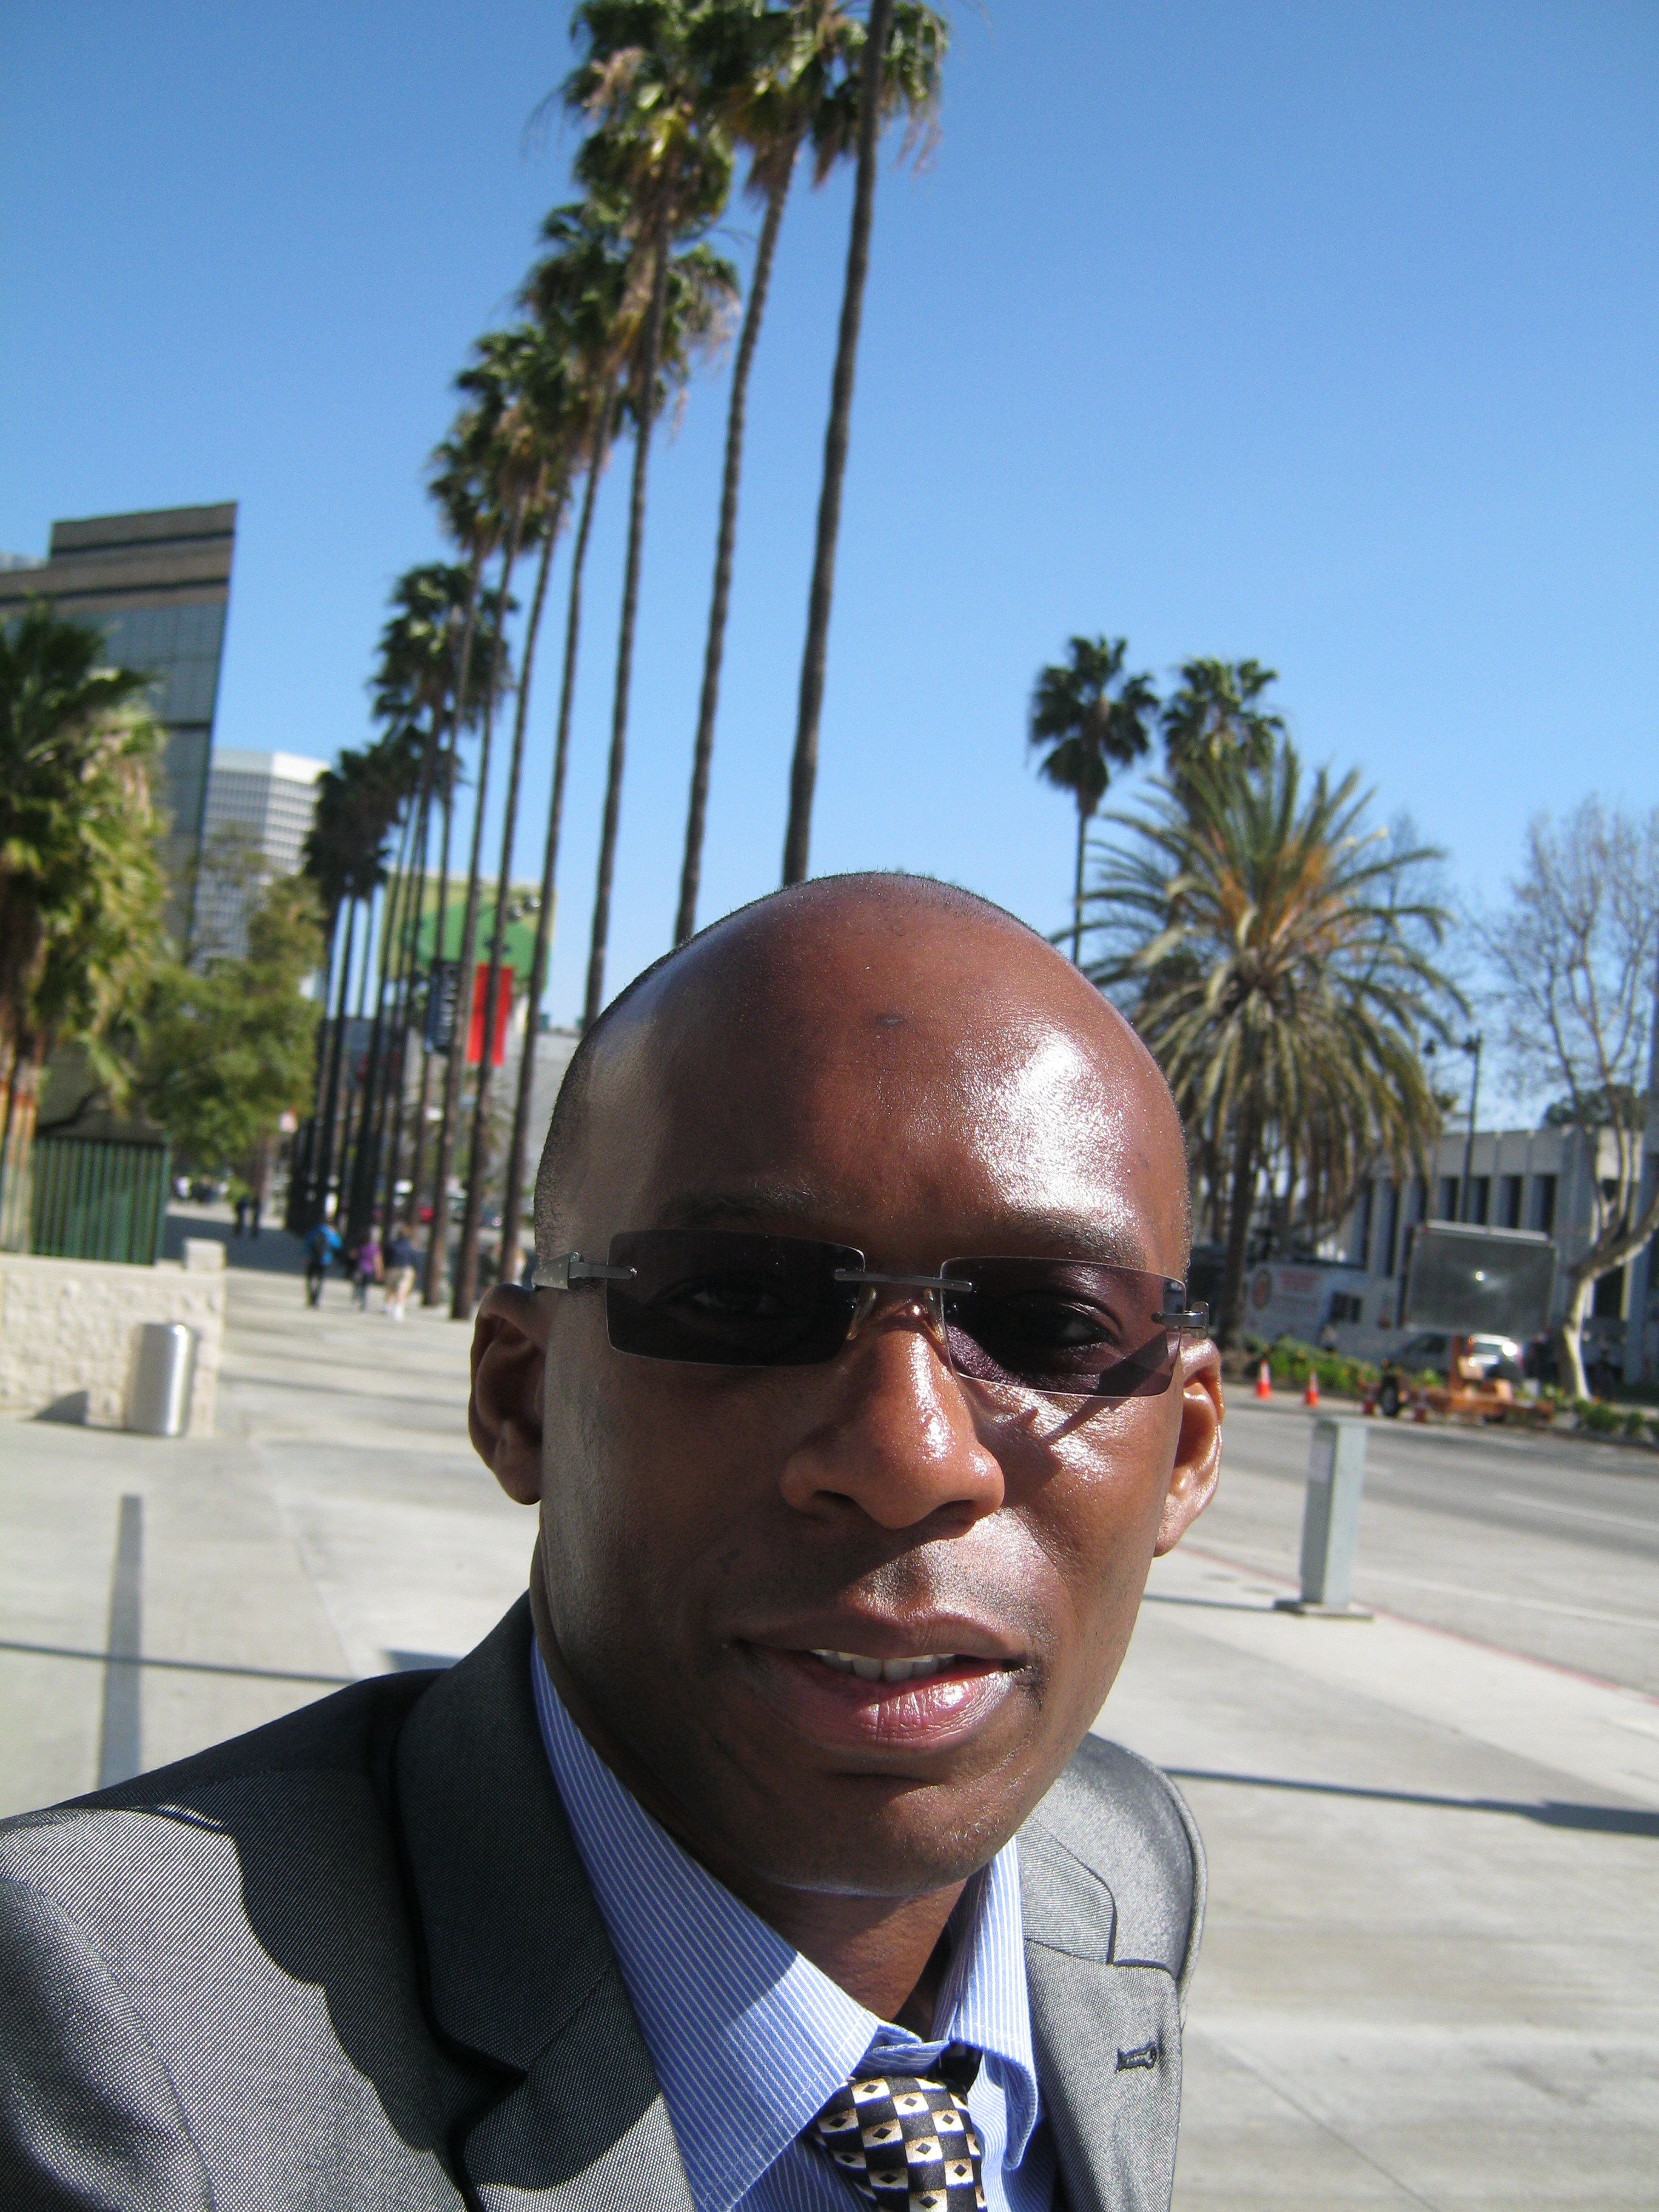 David Olawale Ayinde, Actor on leaving a Talent Agent in Los Angeles, California